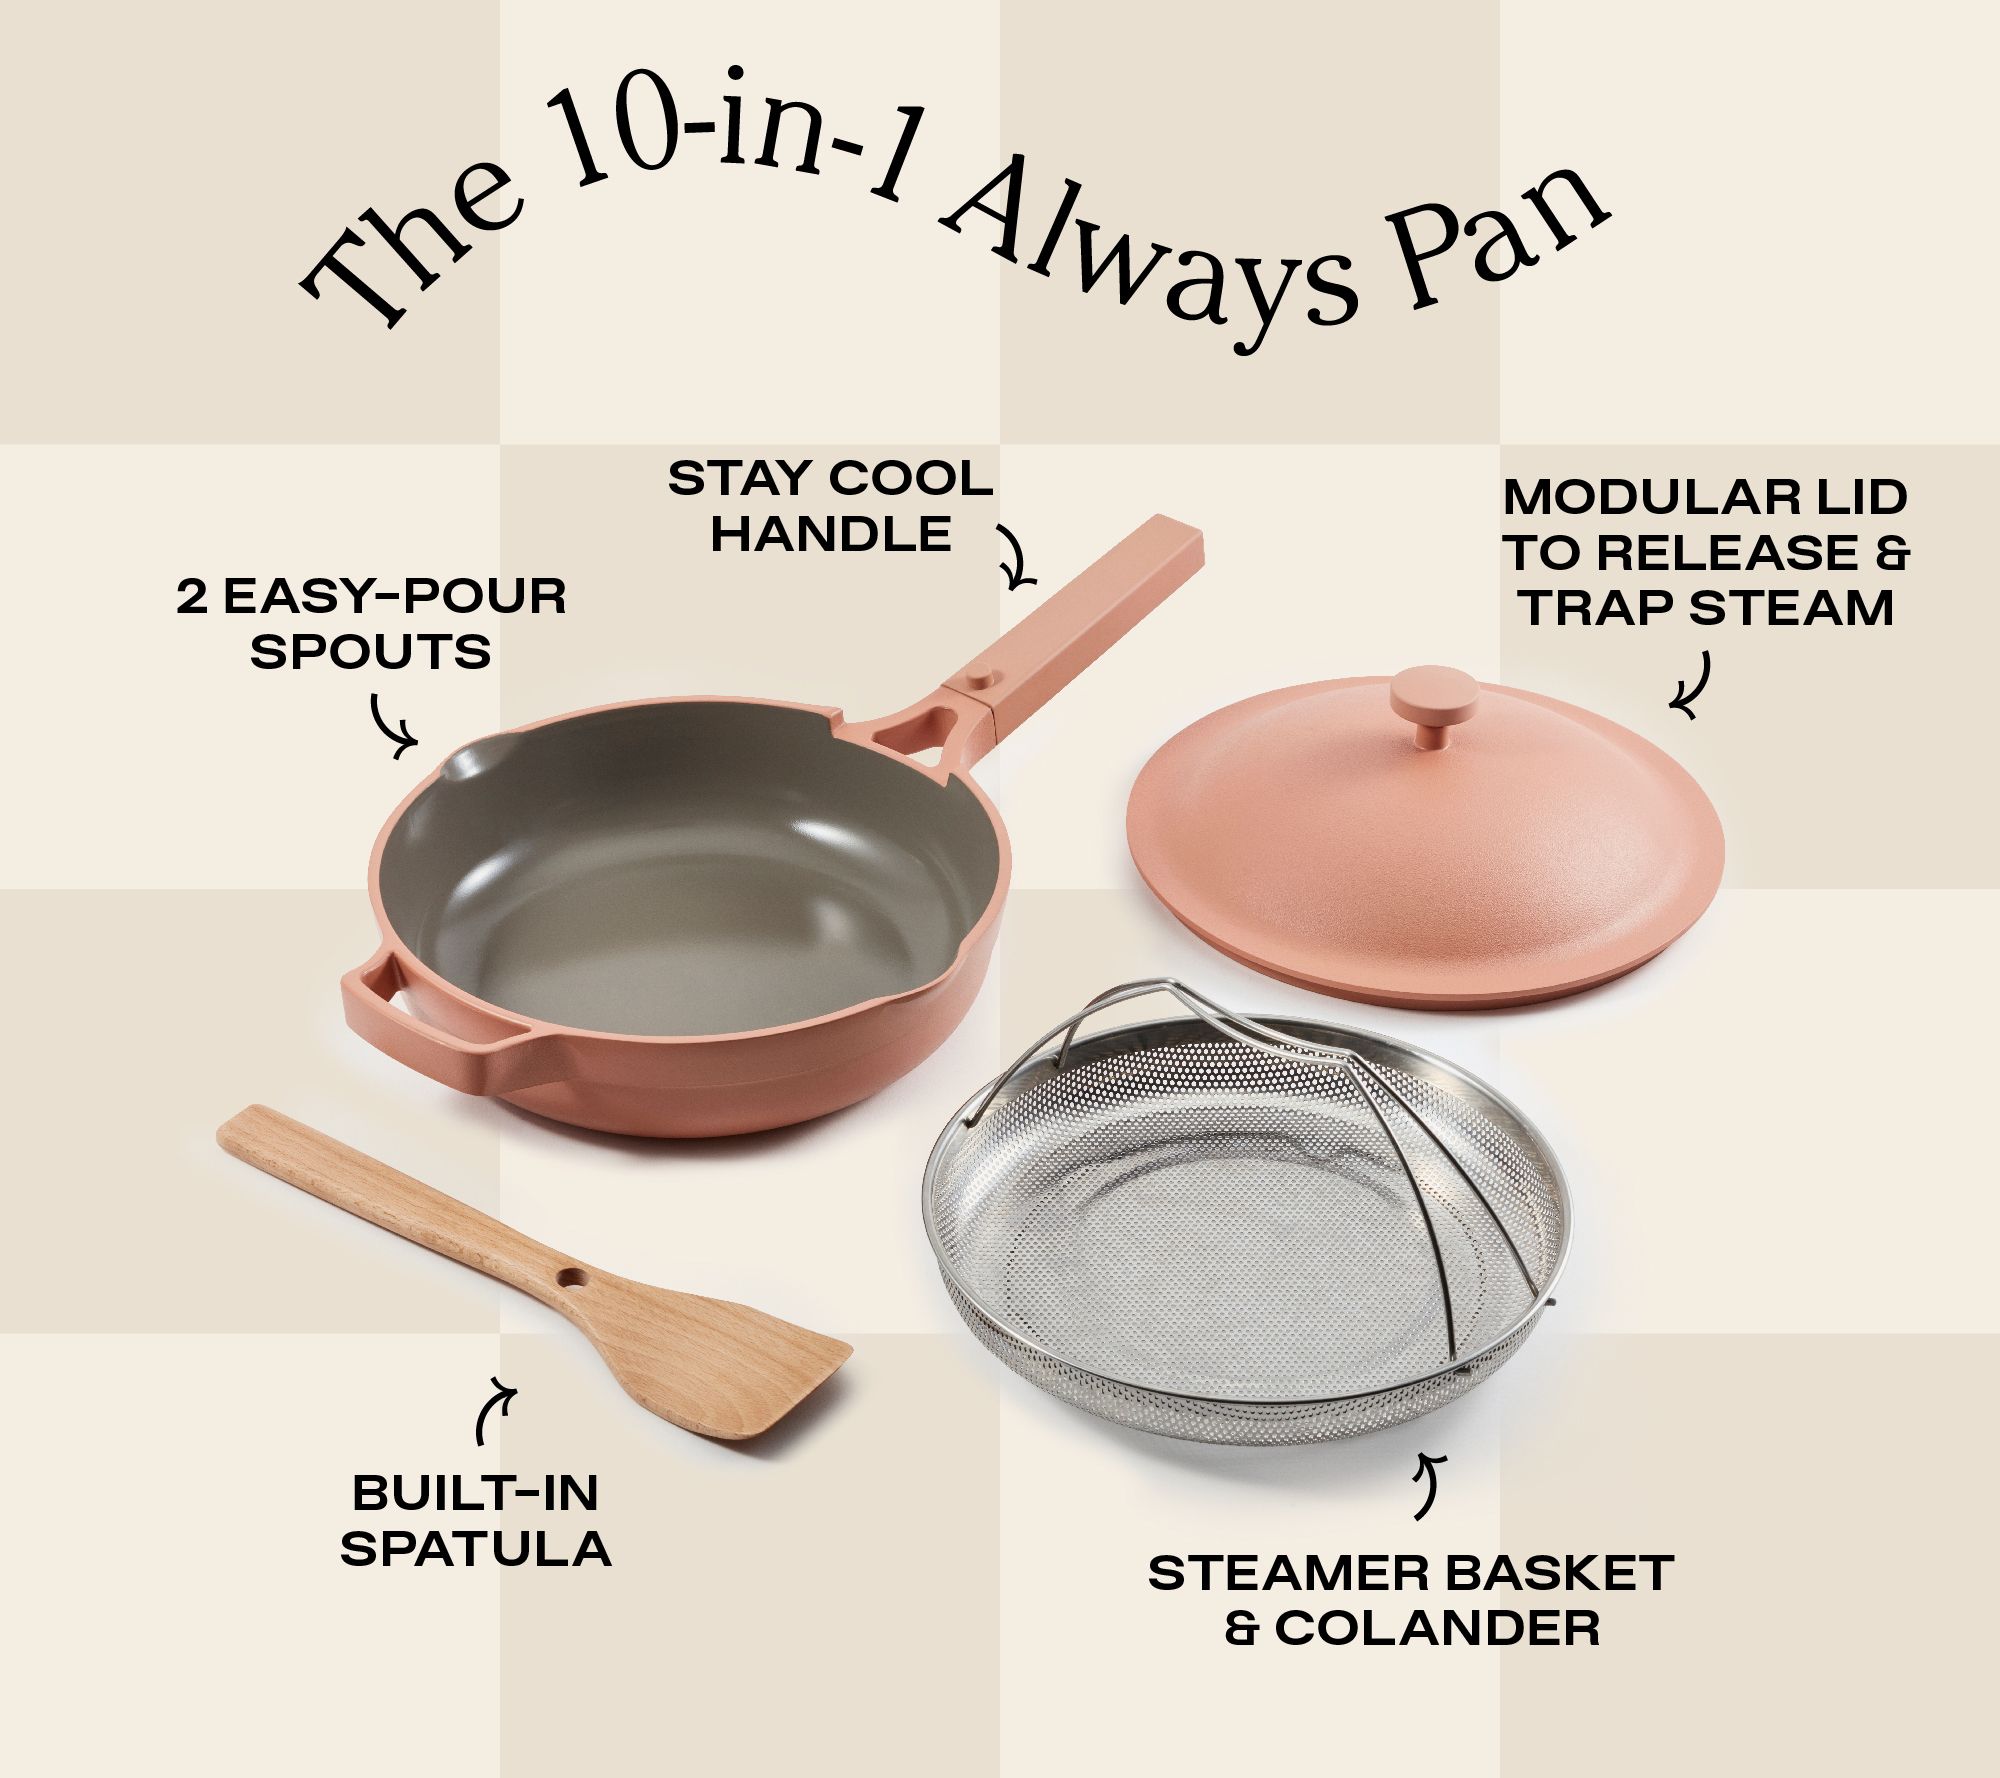 Our Place Always Pan Ceramic Non-Stick Spruce Steamer, Strainer, Spoon Set  Spice